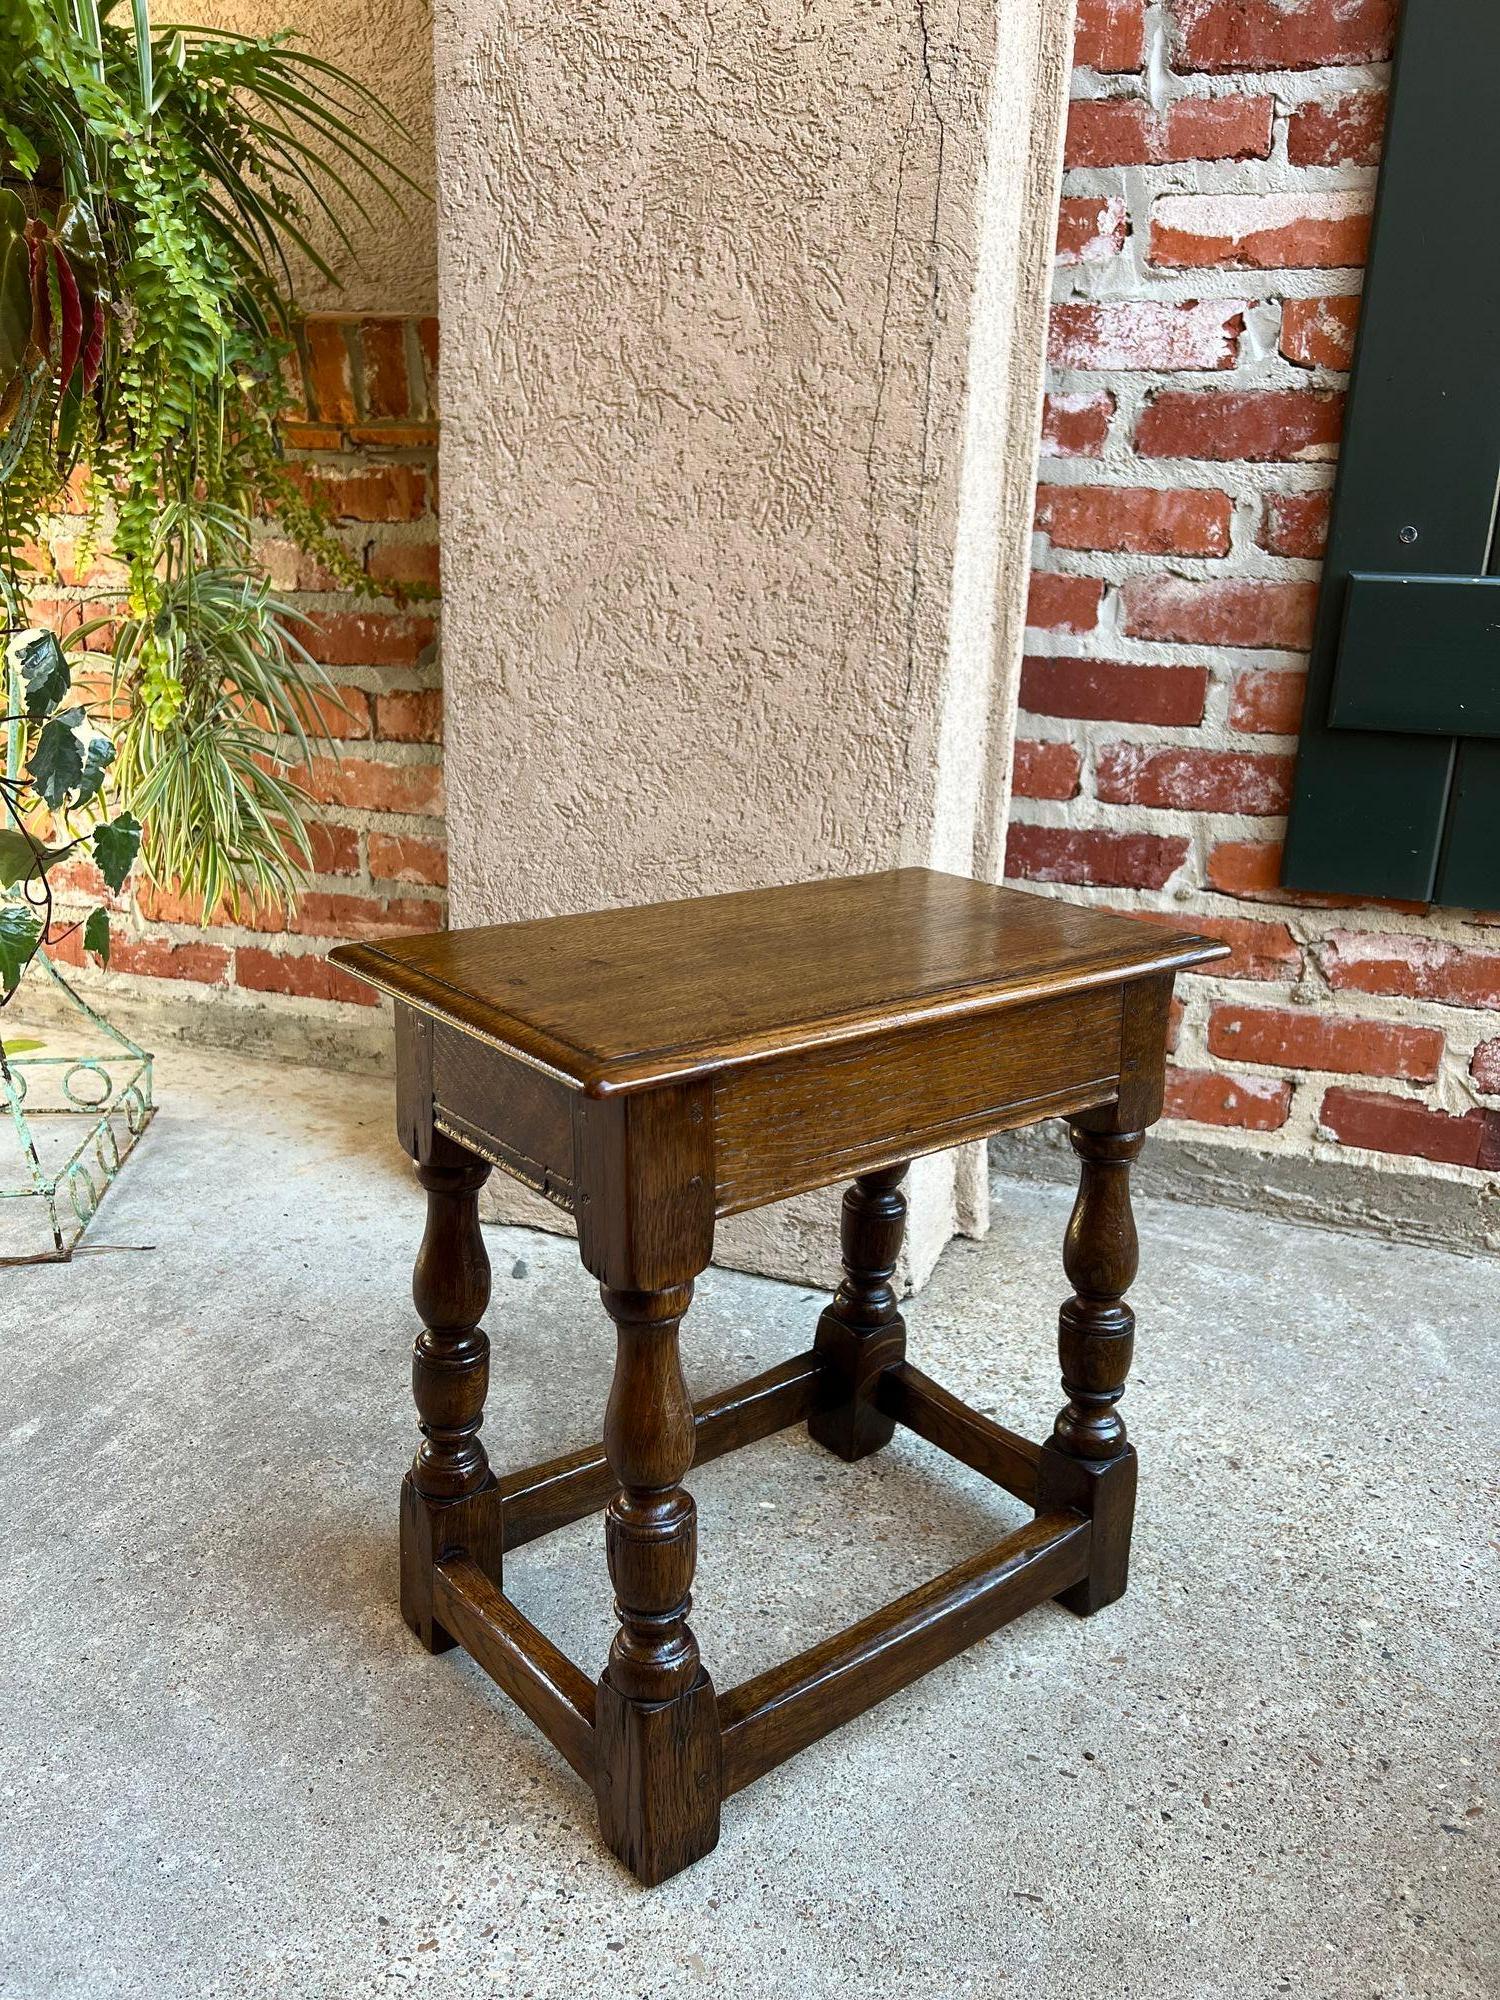 19th century English Oak Joint Stool Pegged Bench Display Stand For Sale 7